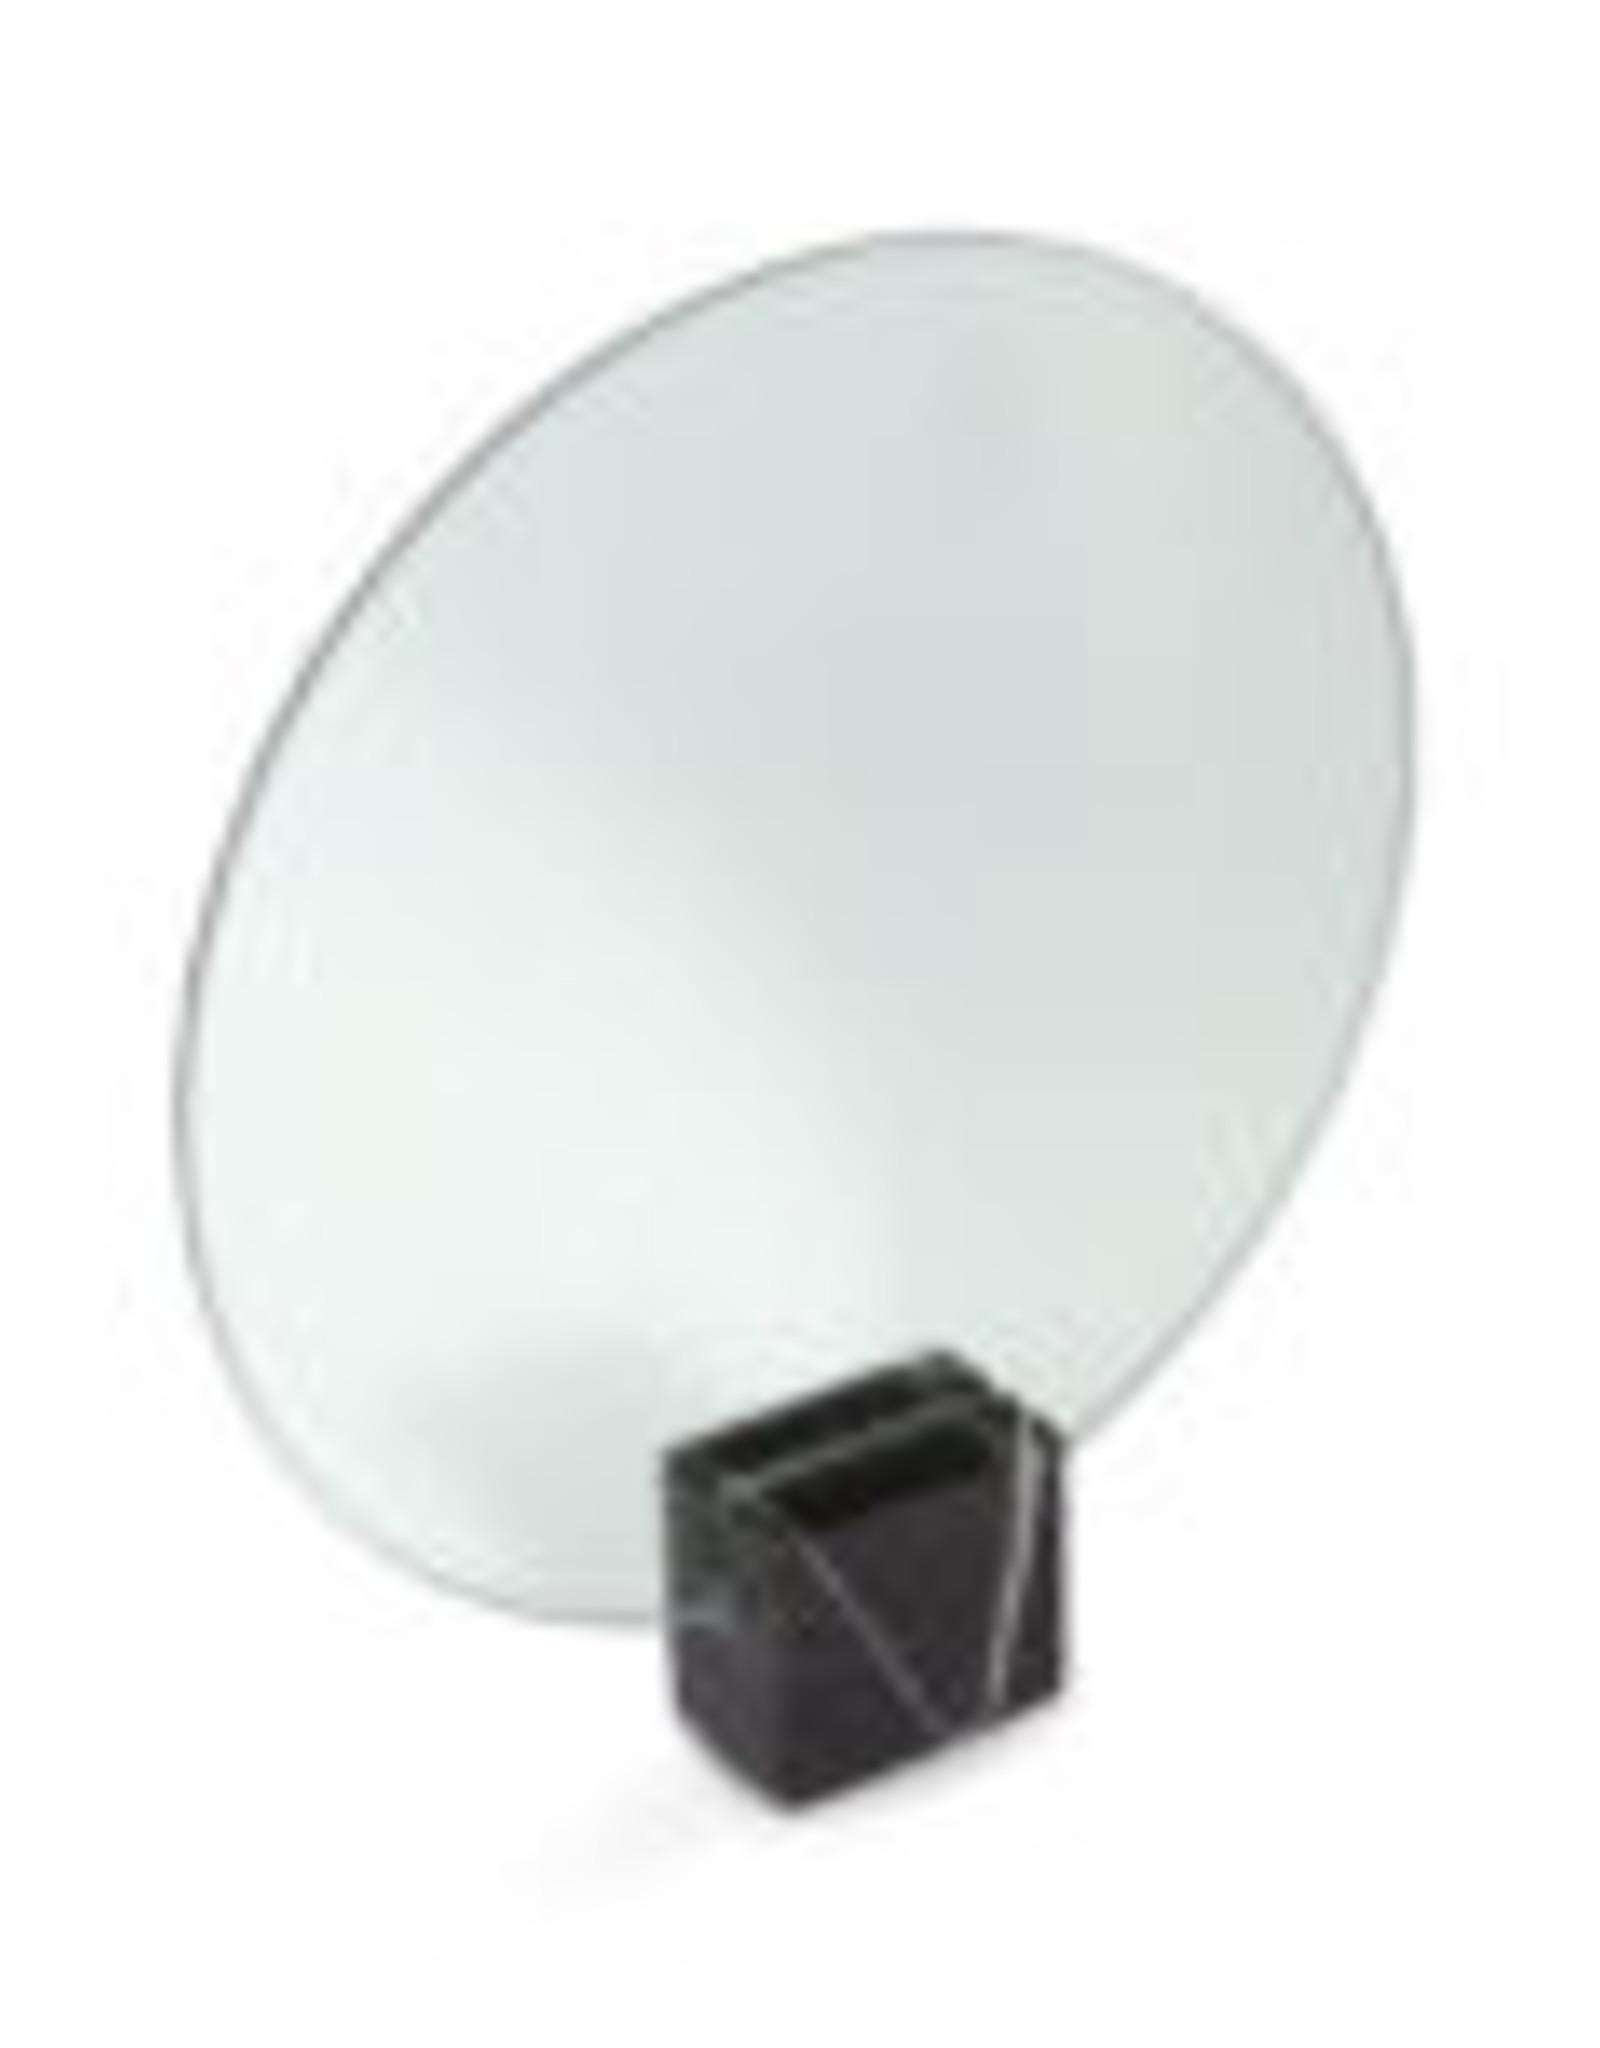 Style In Form Mirror SIF Moon Marble Black ALF-002